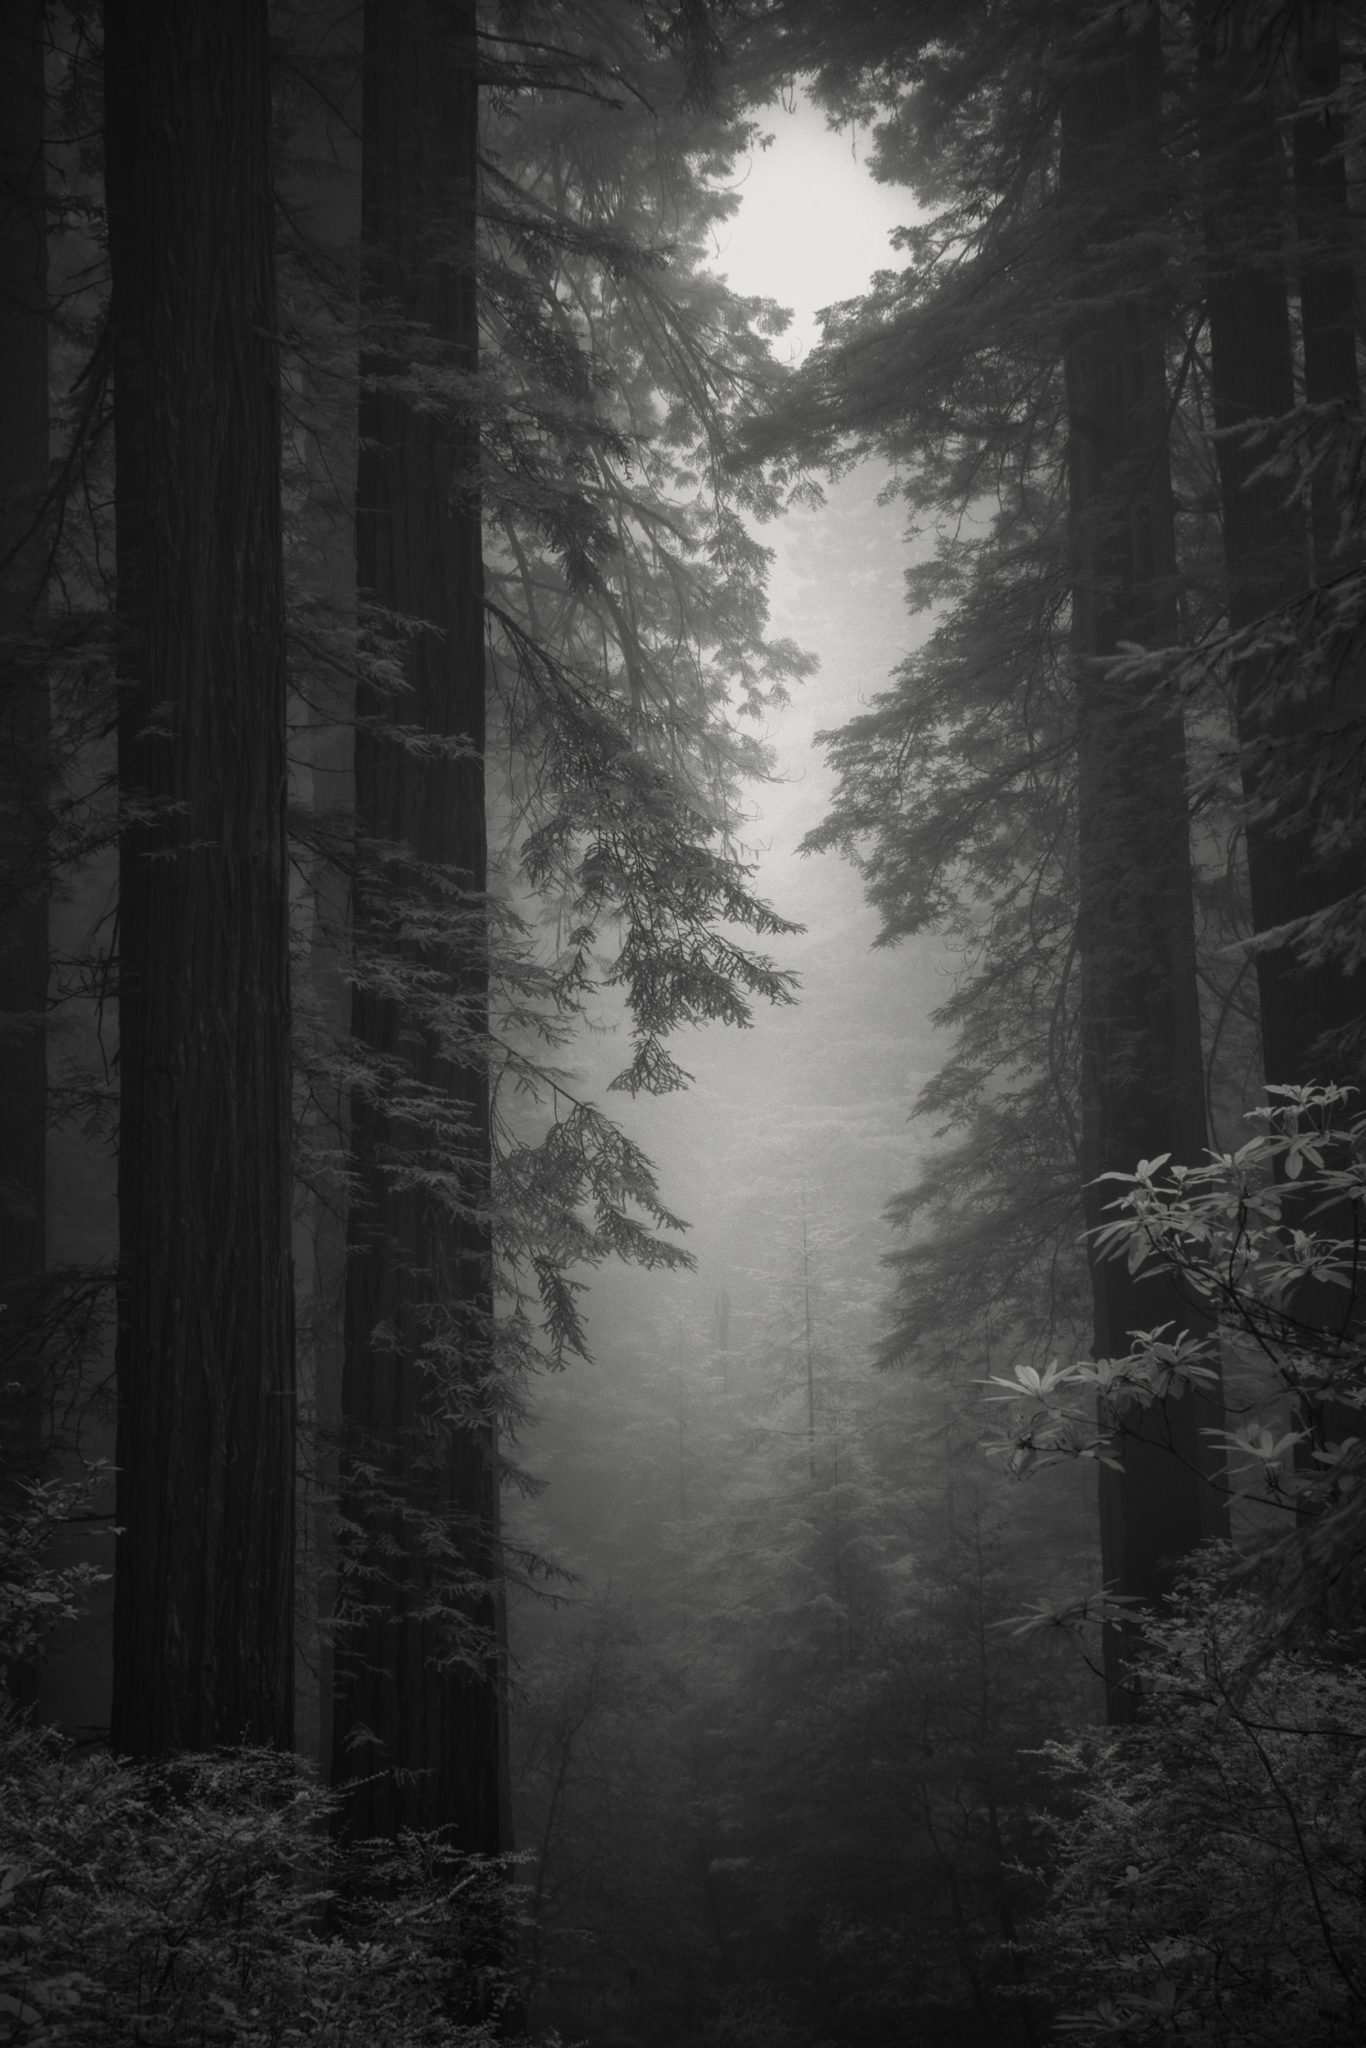 Nathan Wirth's Infrared Sony a7r Got These Spooky Redwood Photos